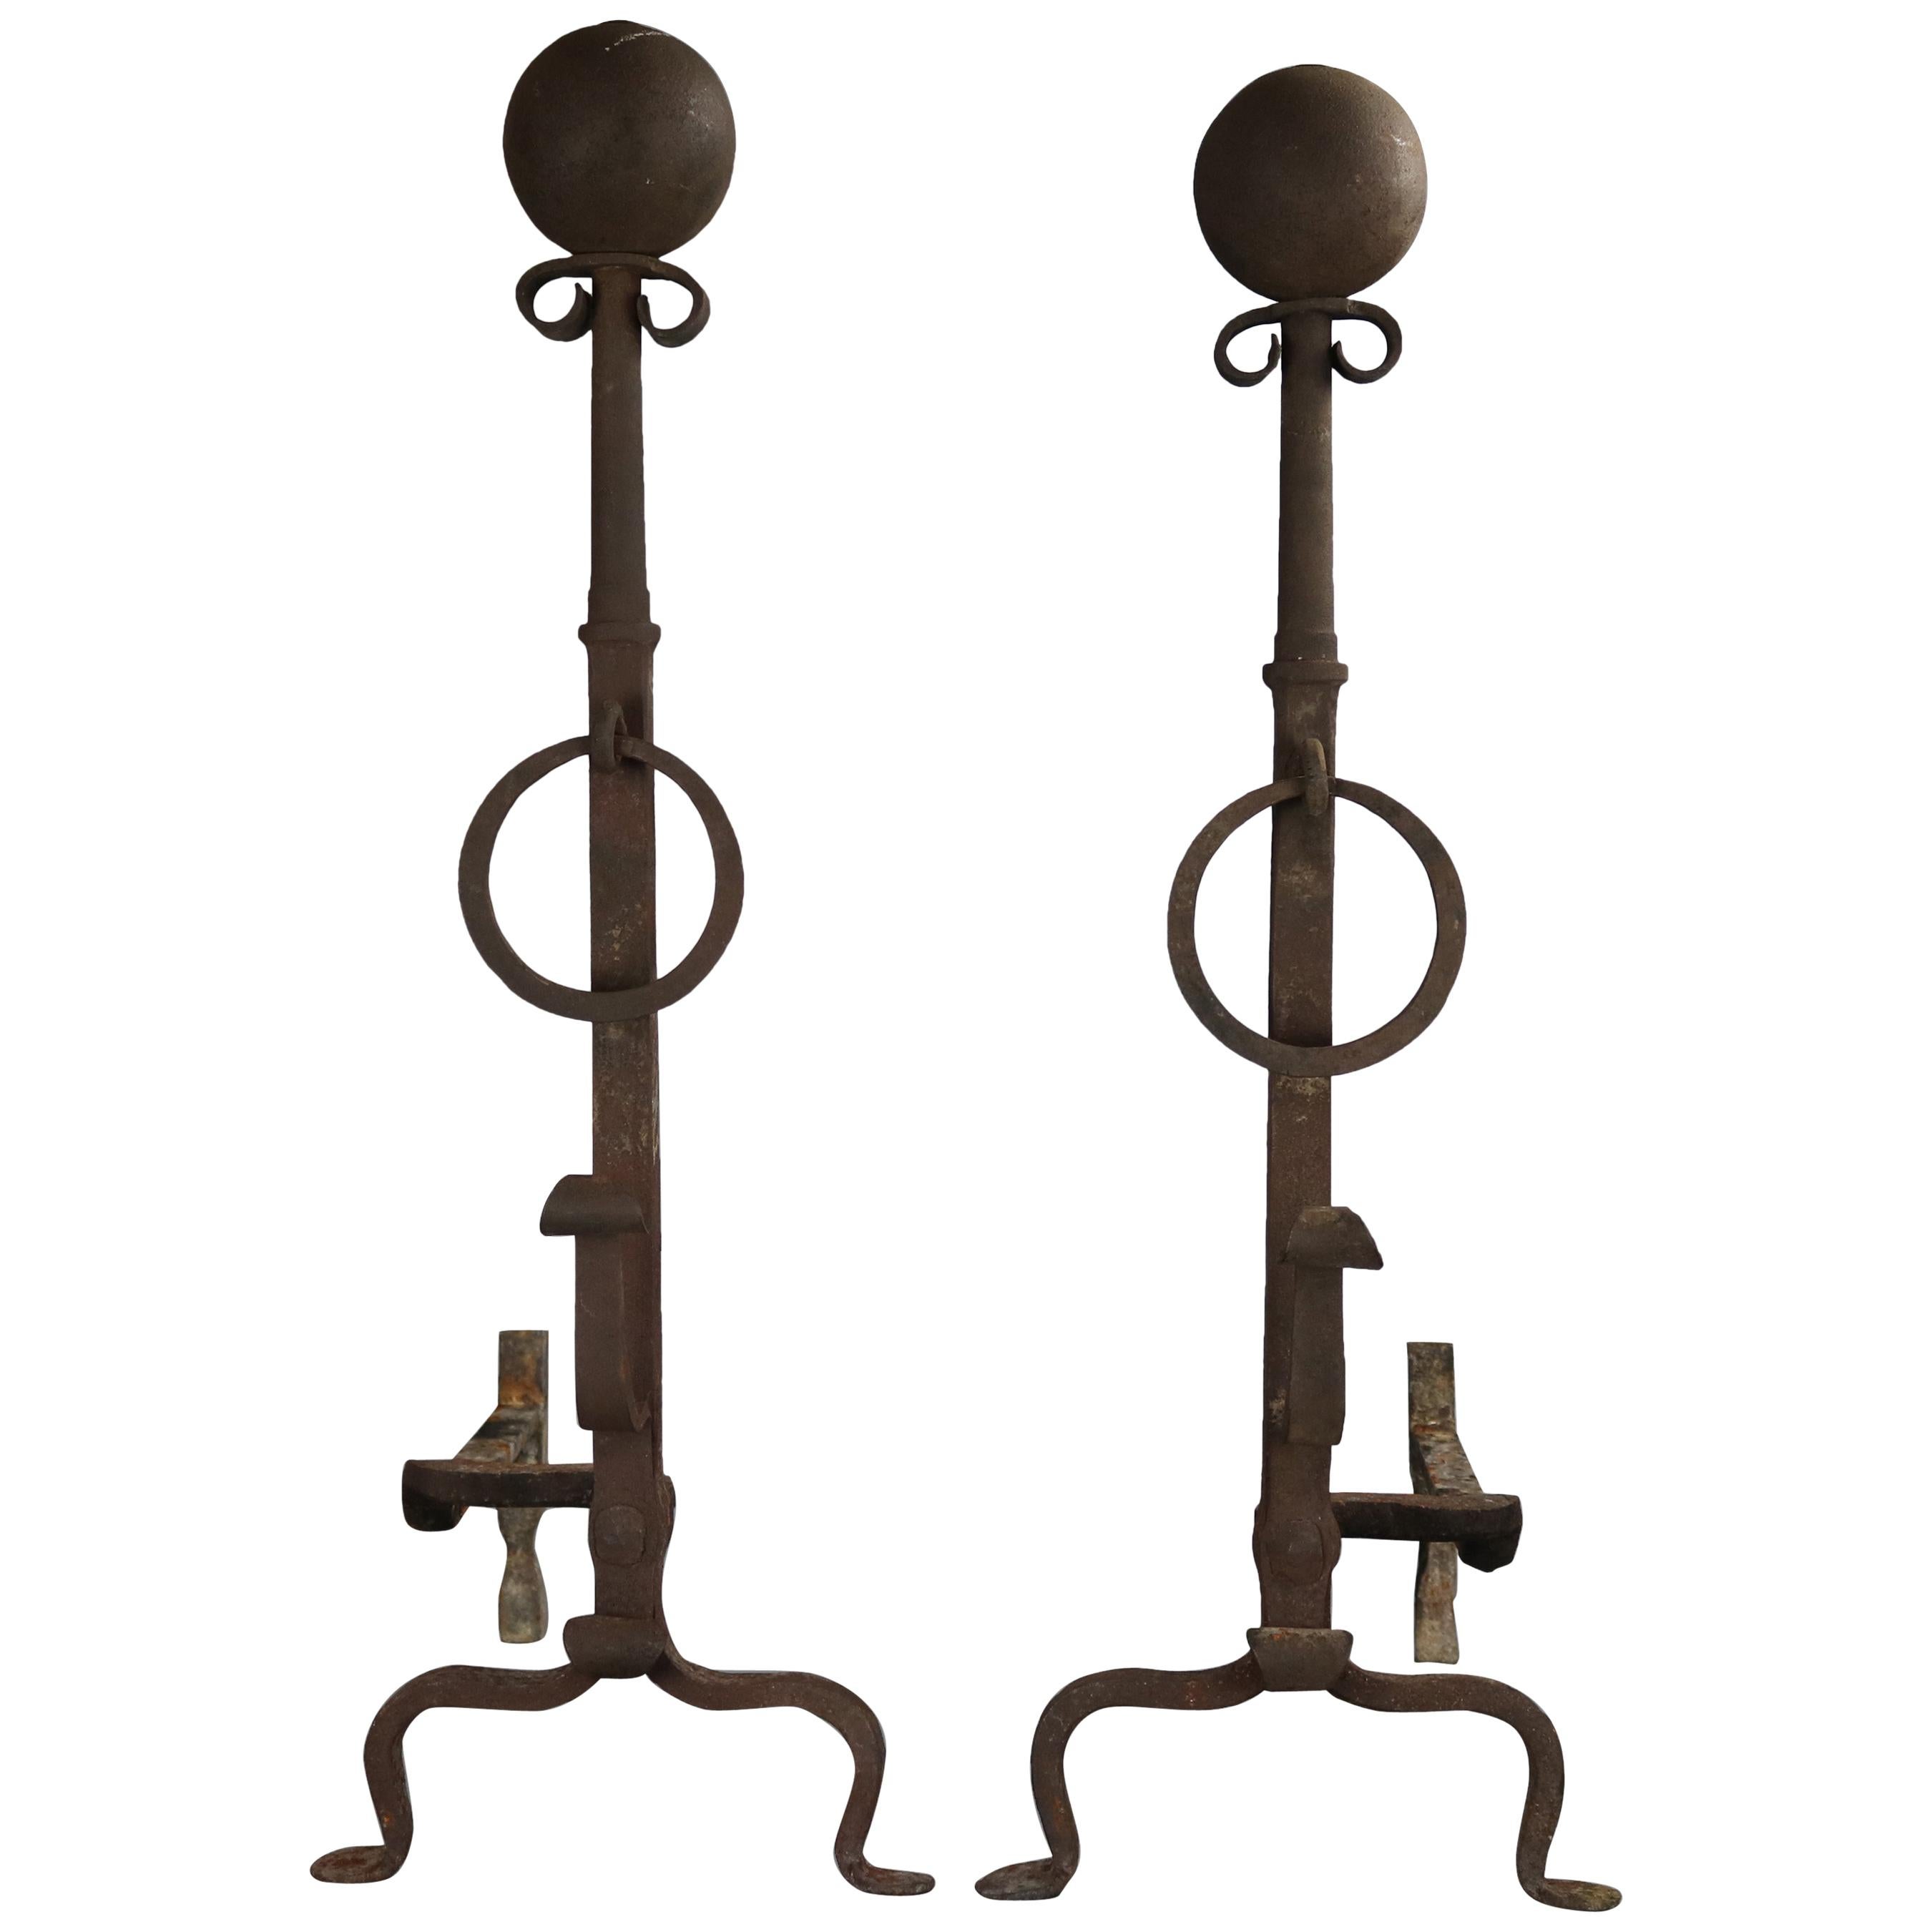 Pair of Oversized Arts & Crafts Wrought Iron Fireplace Andirons 19th Century